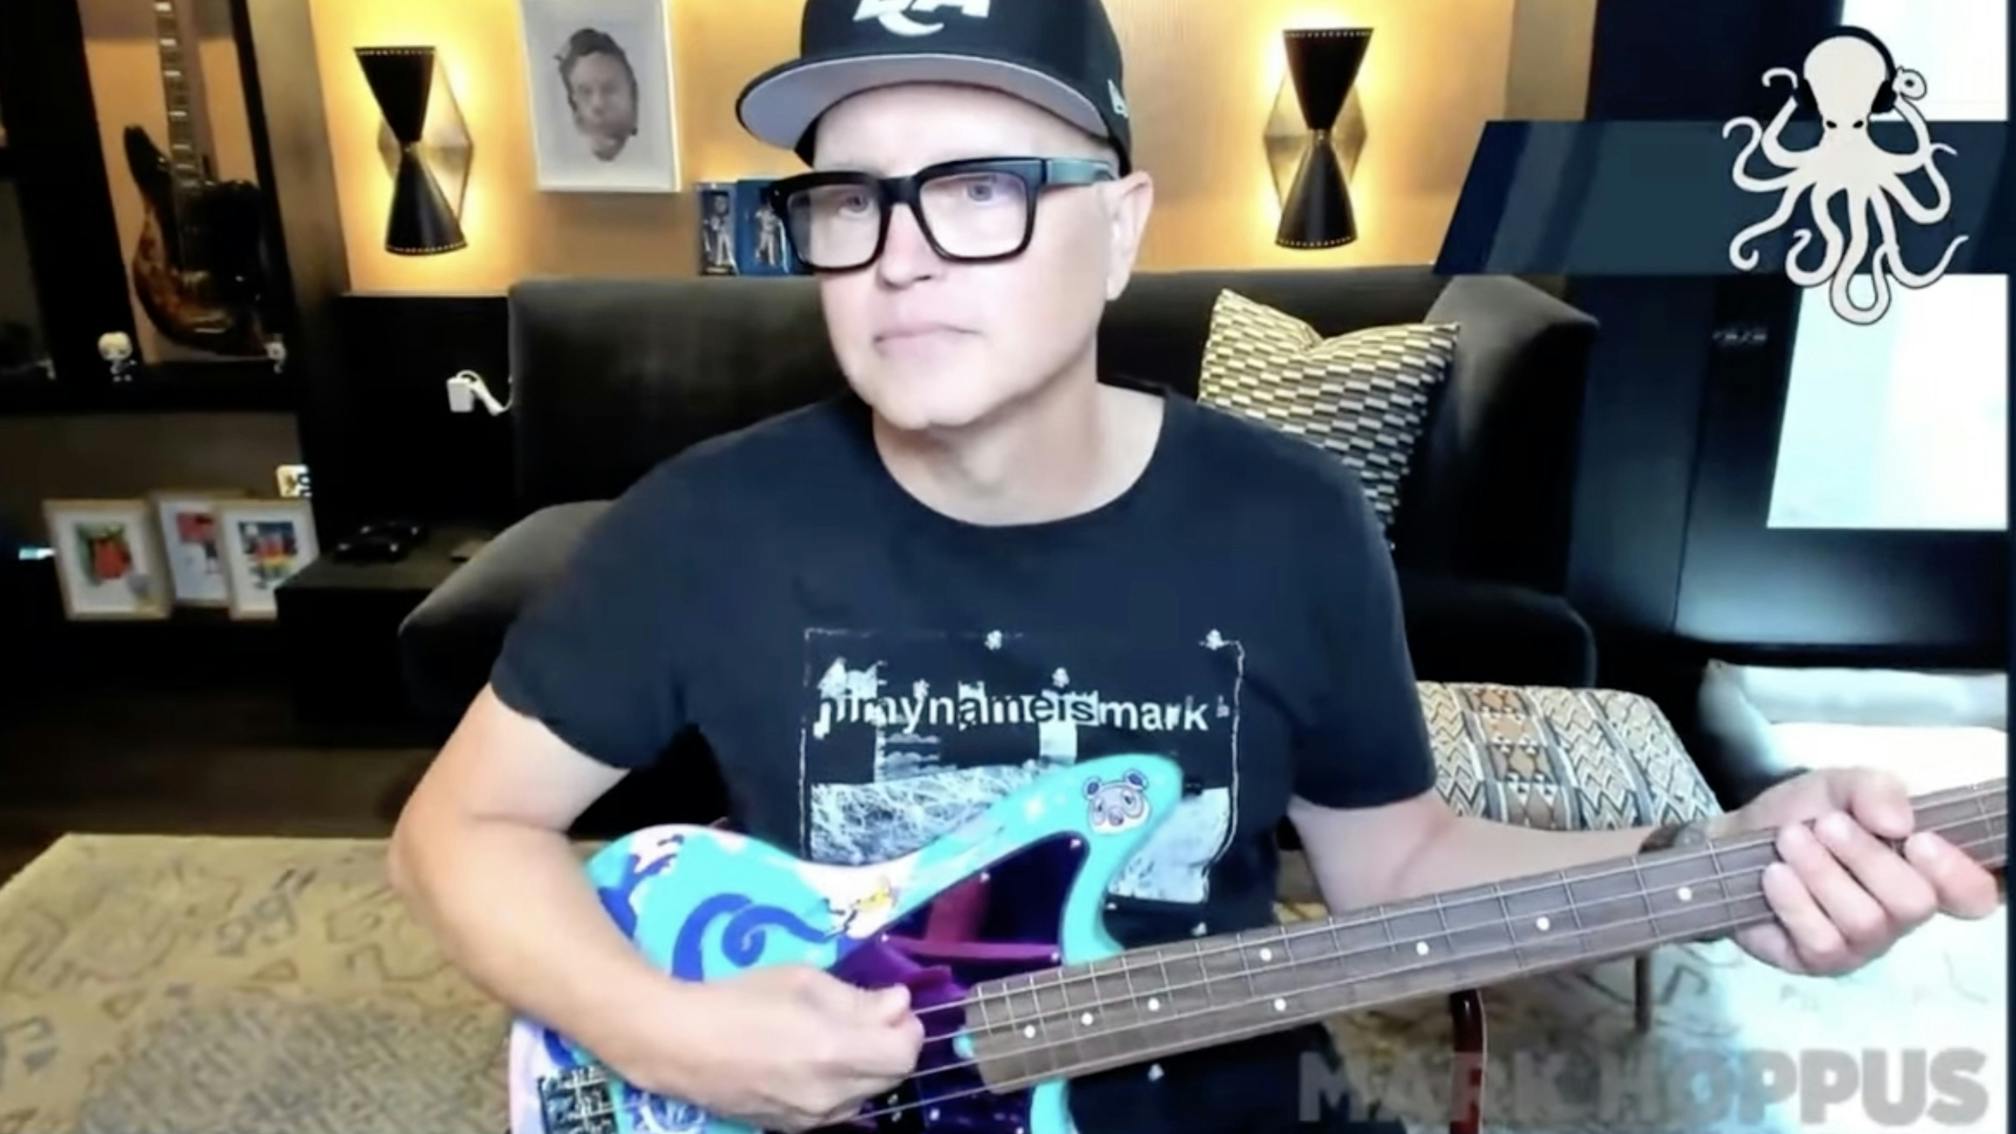 See Mark Hoppus jamming blink-182 songs on bass for the first time since his cancer diagnosis